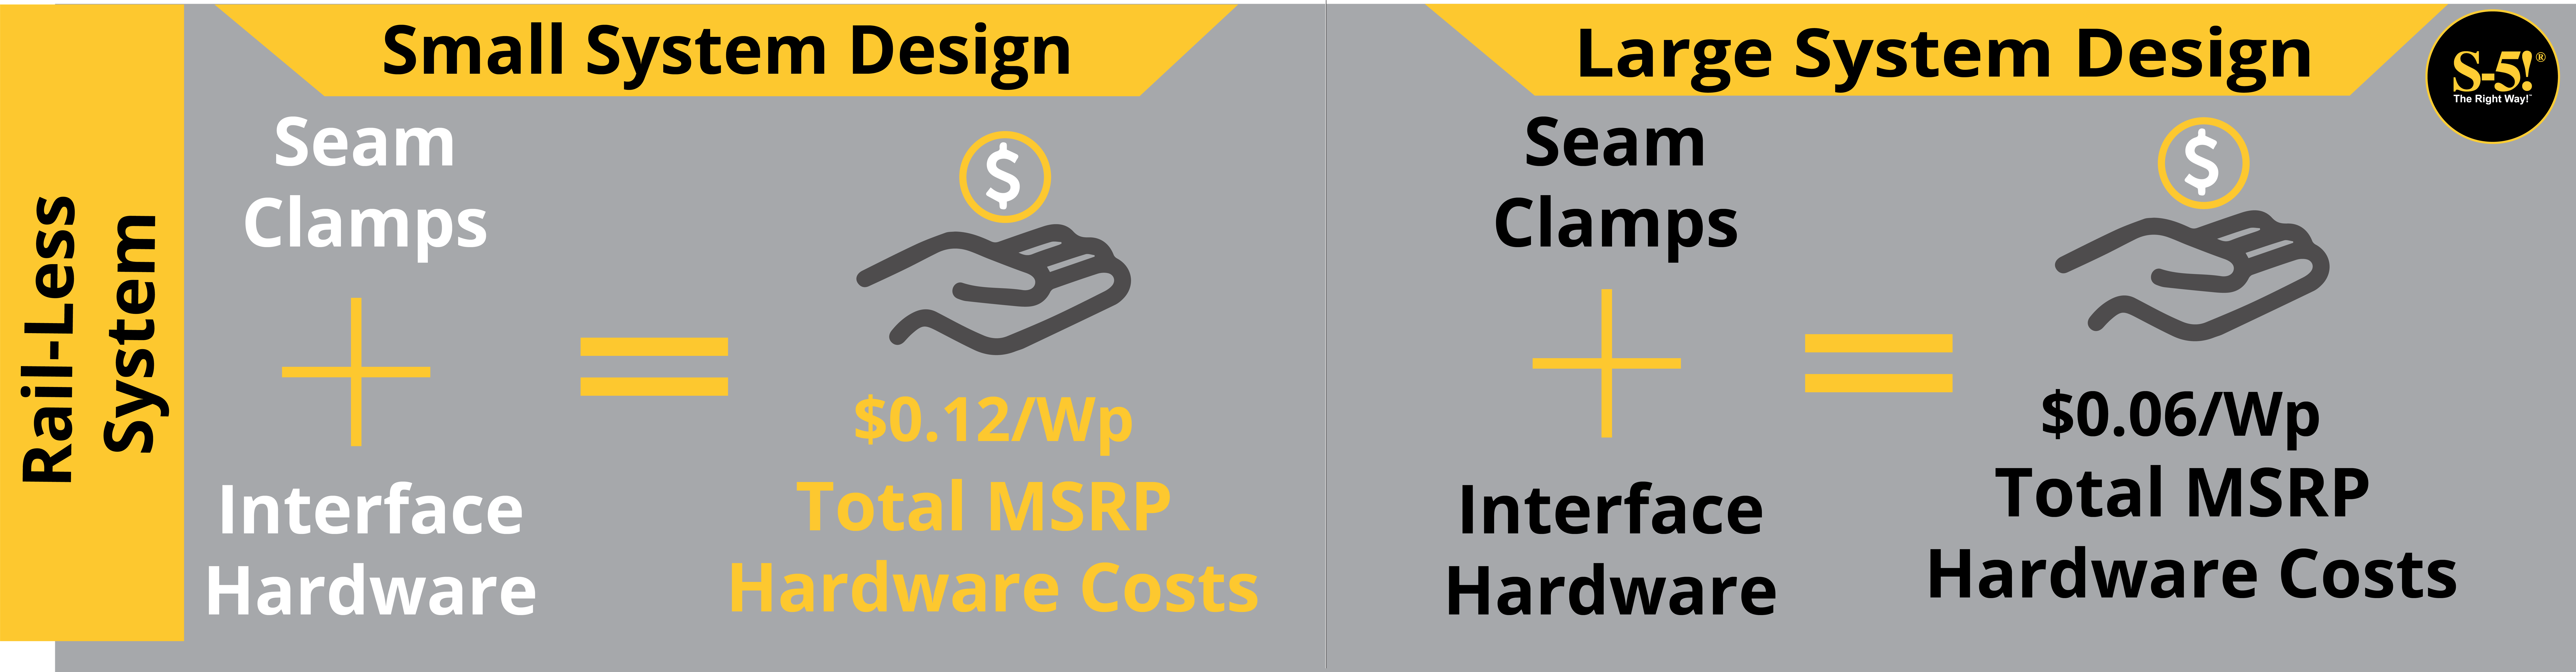 S-5!® - Rail-Less System Costs - Small Design vs Large Design Systems